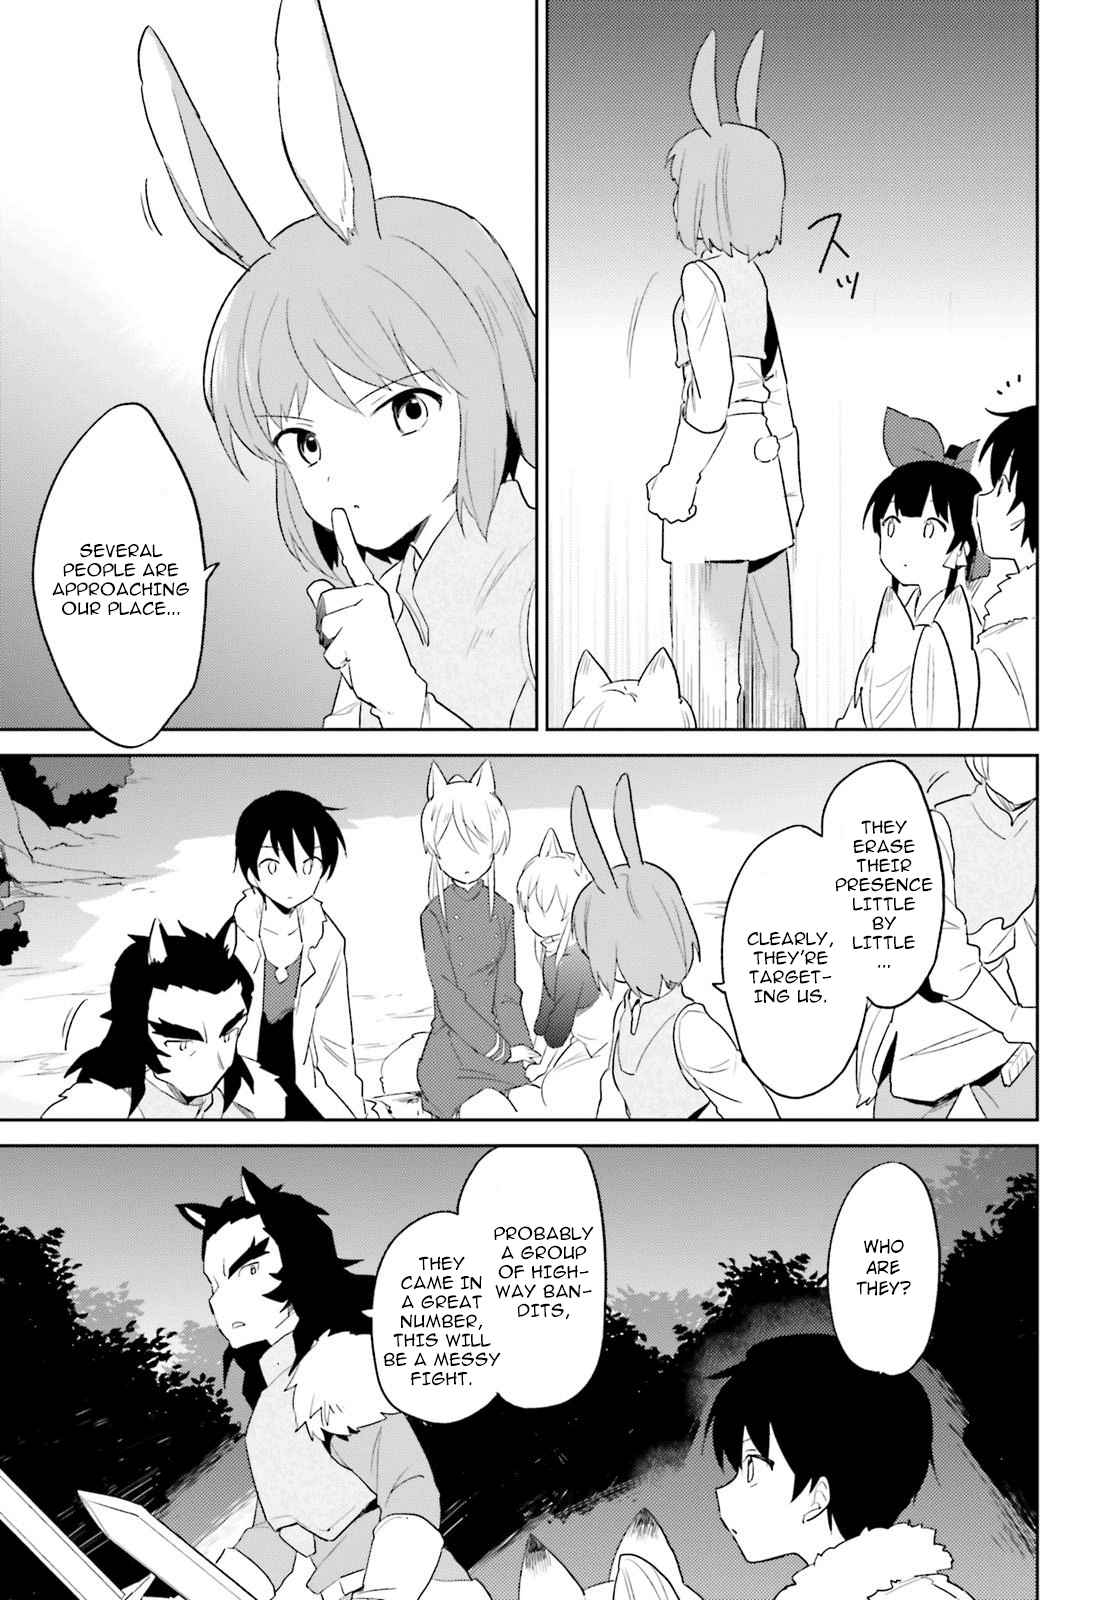 In Another World With My Smartphone Vol. 4 Ch. 17 Episode 17